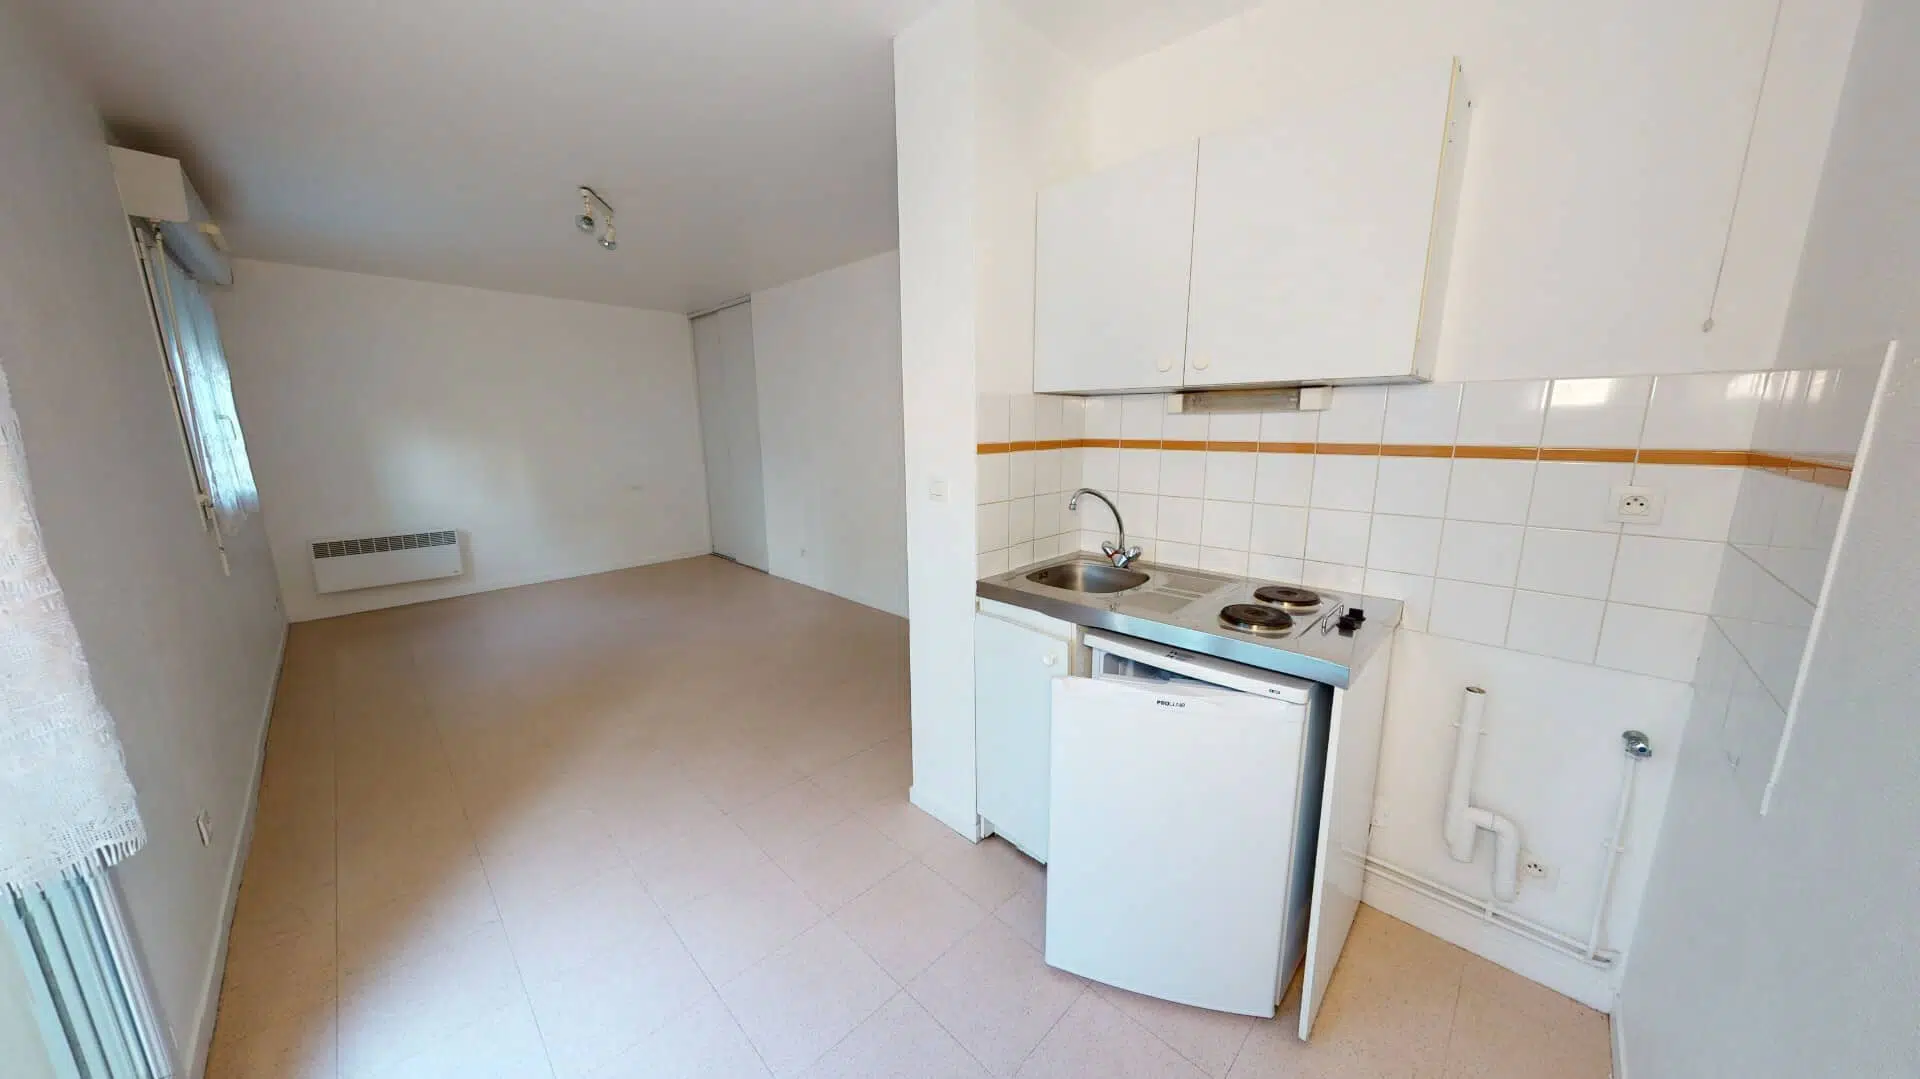 Location Appartement type F1 Le Havre 142-1